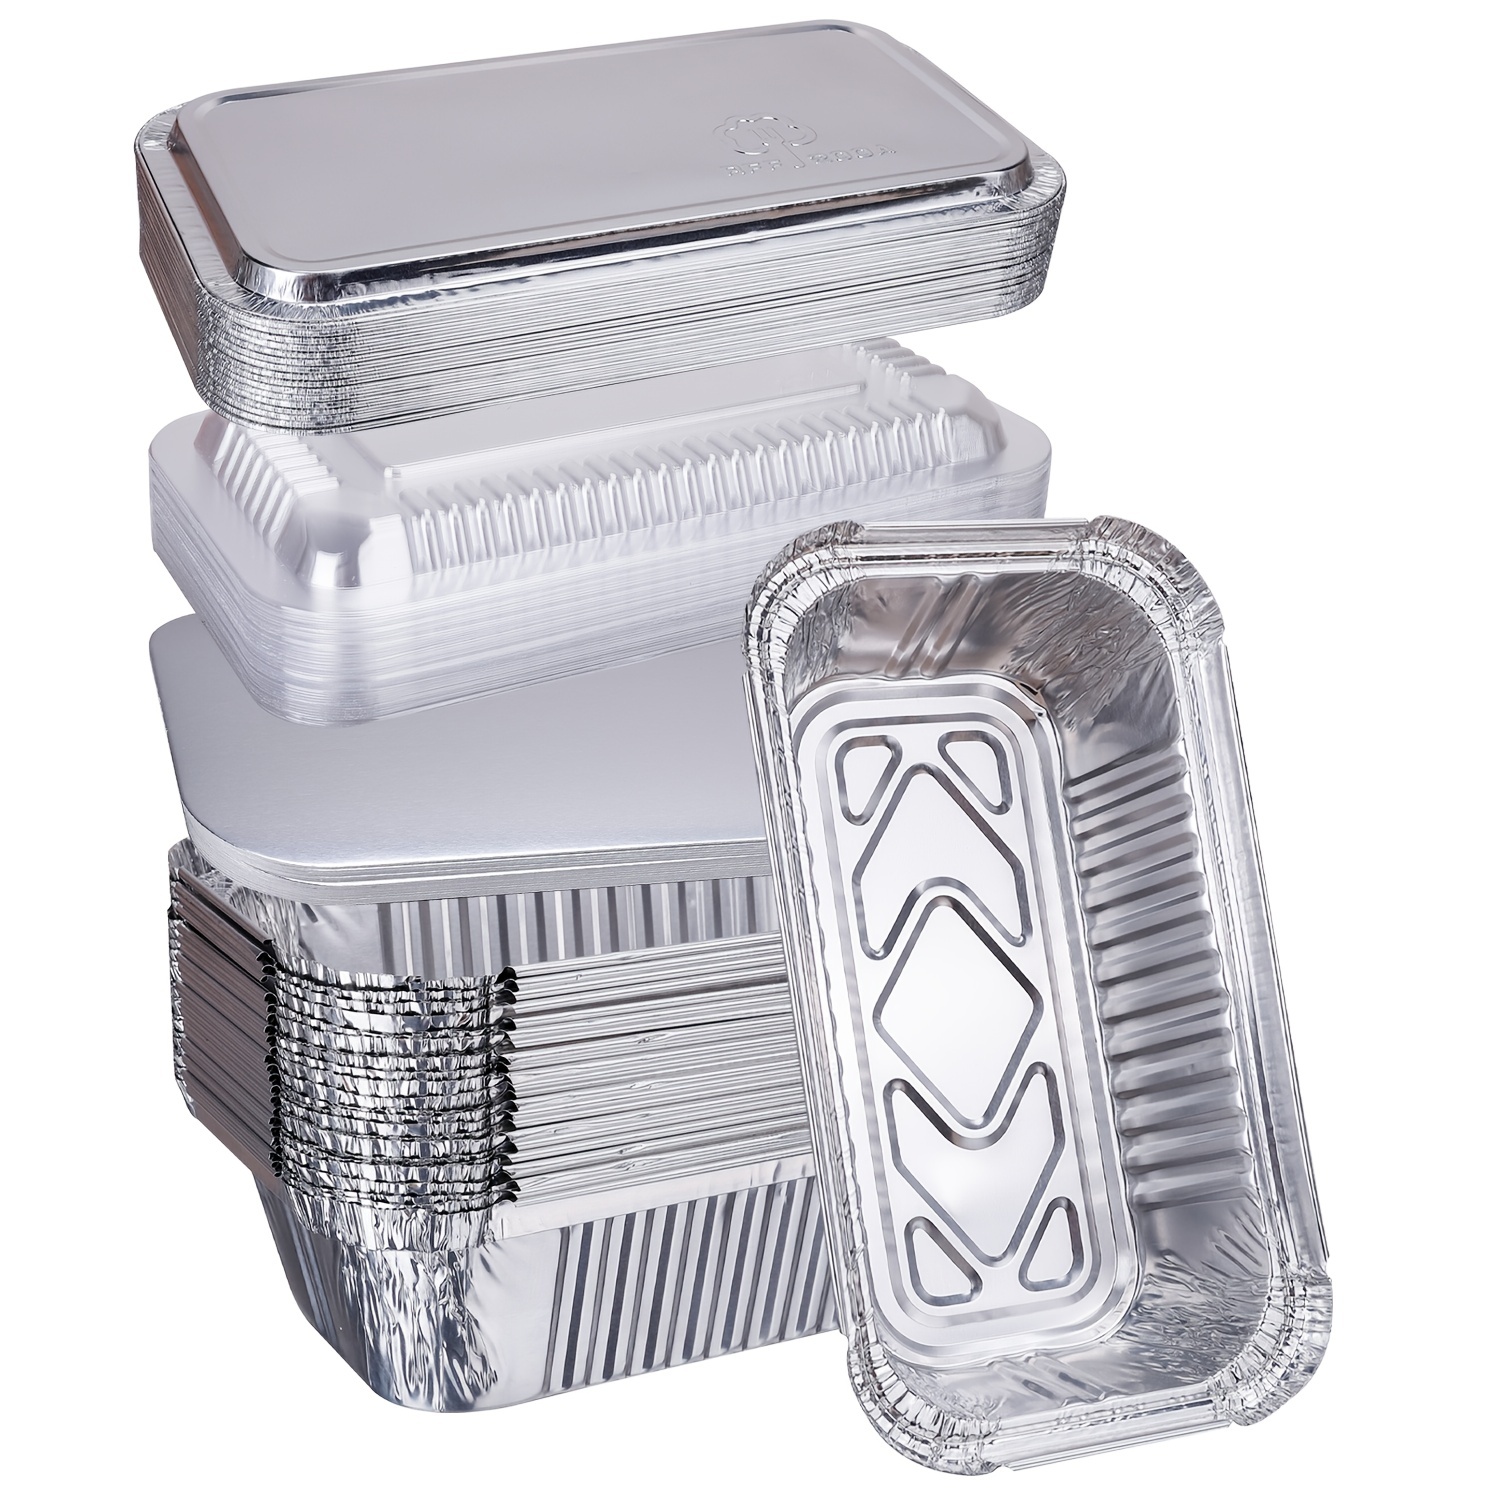 Stock Your Home Disposable Aluminum Mini Loaf Pans with Lids, 1 lb (30  Pack) New & Improved Plastic Dome Lid Foil Baking Tins, Tin Pans for Cake